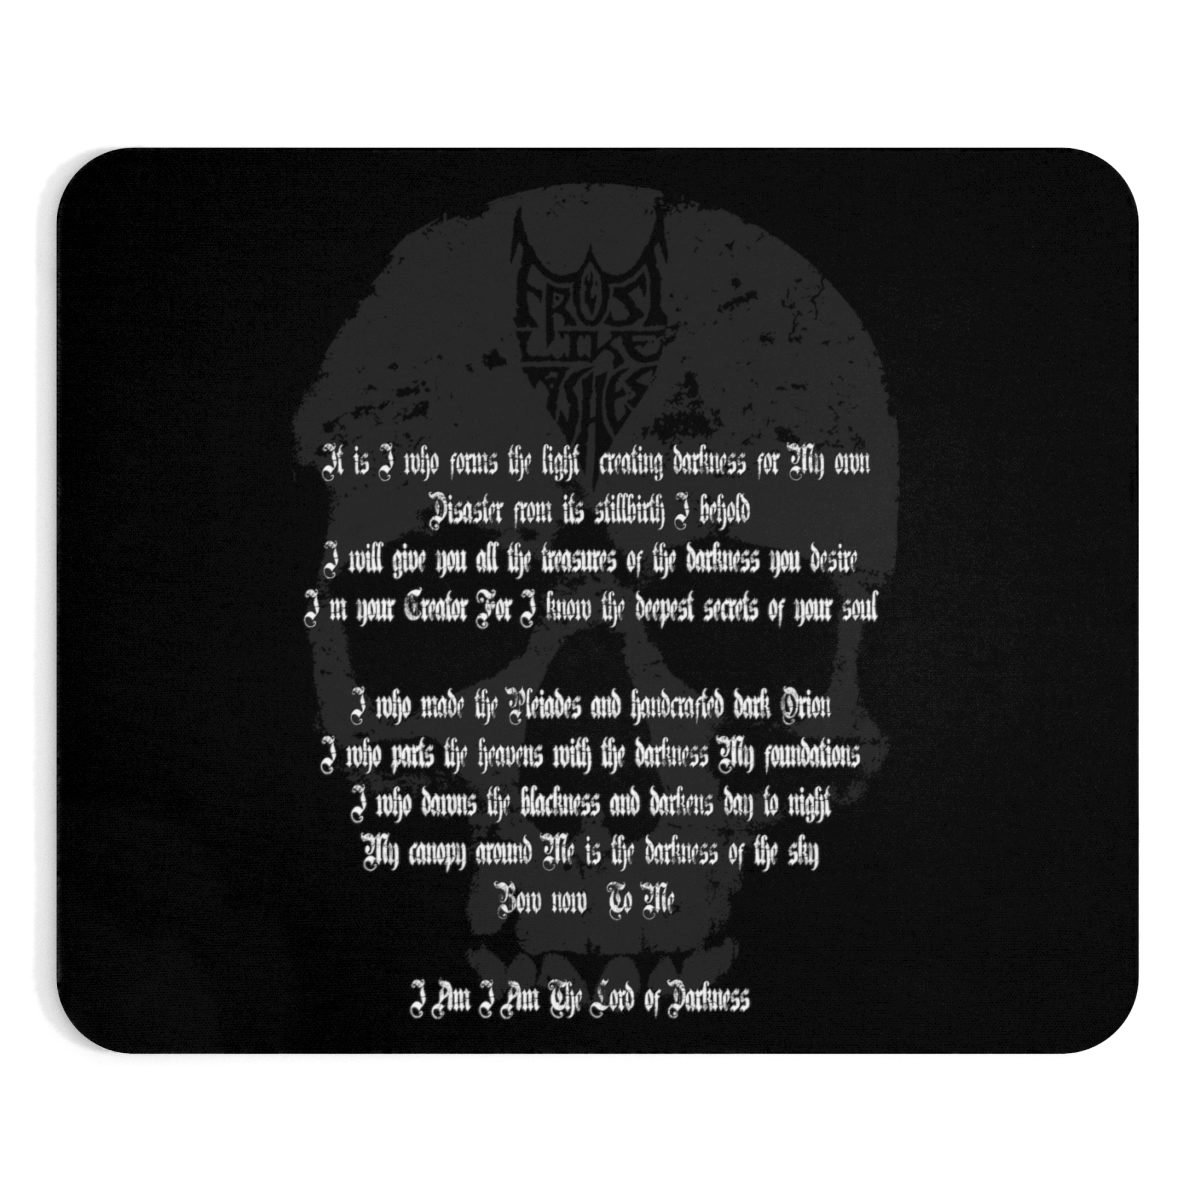 Frost Like Ashes Lord of Darkness Lyrics Mouse Pad